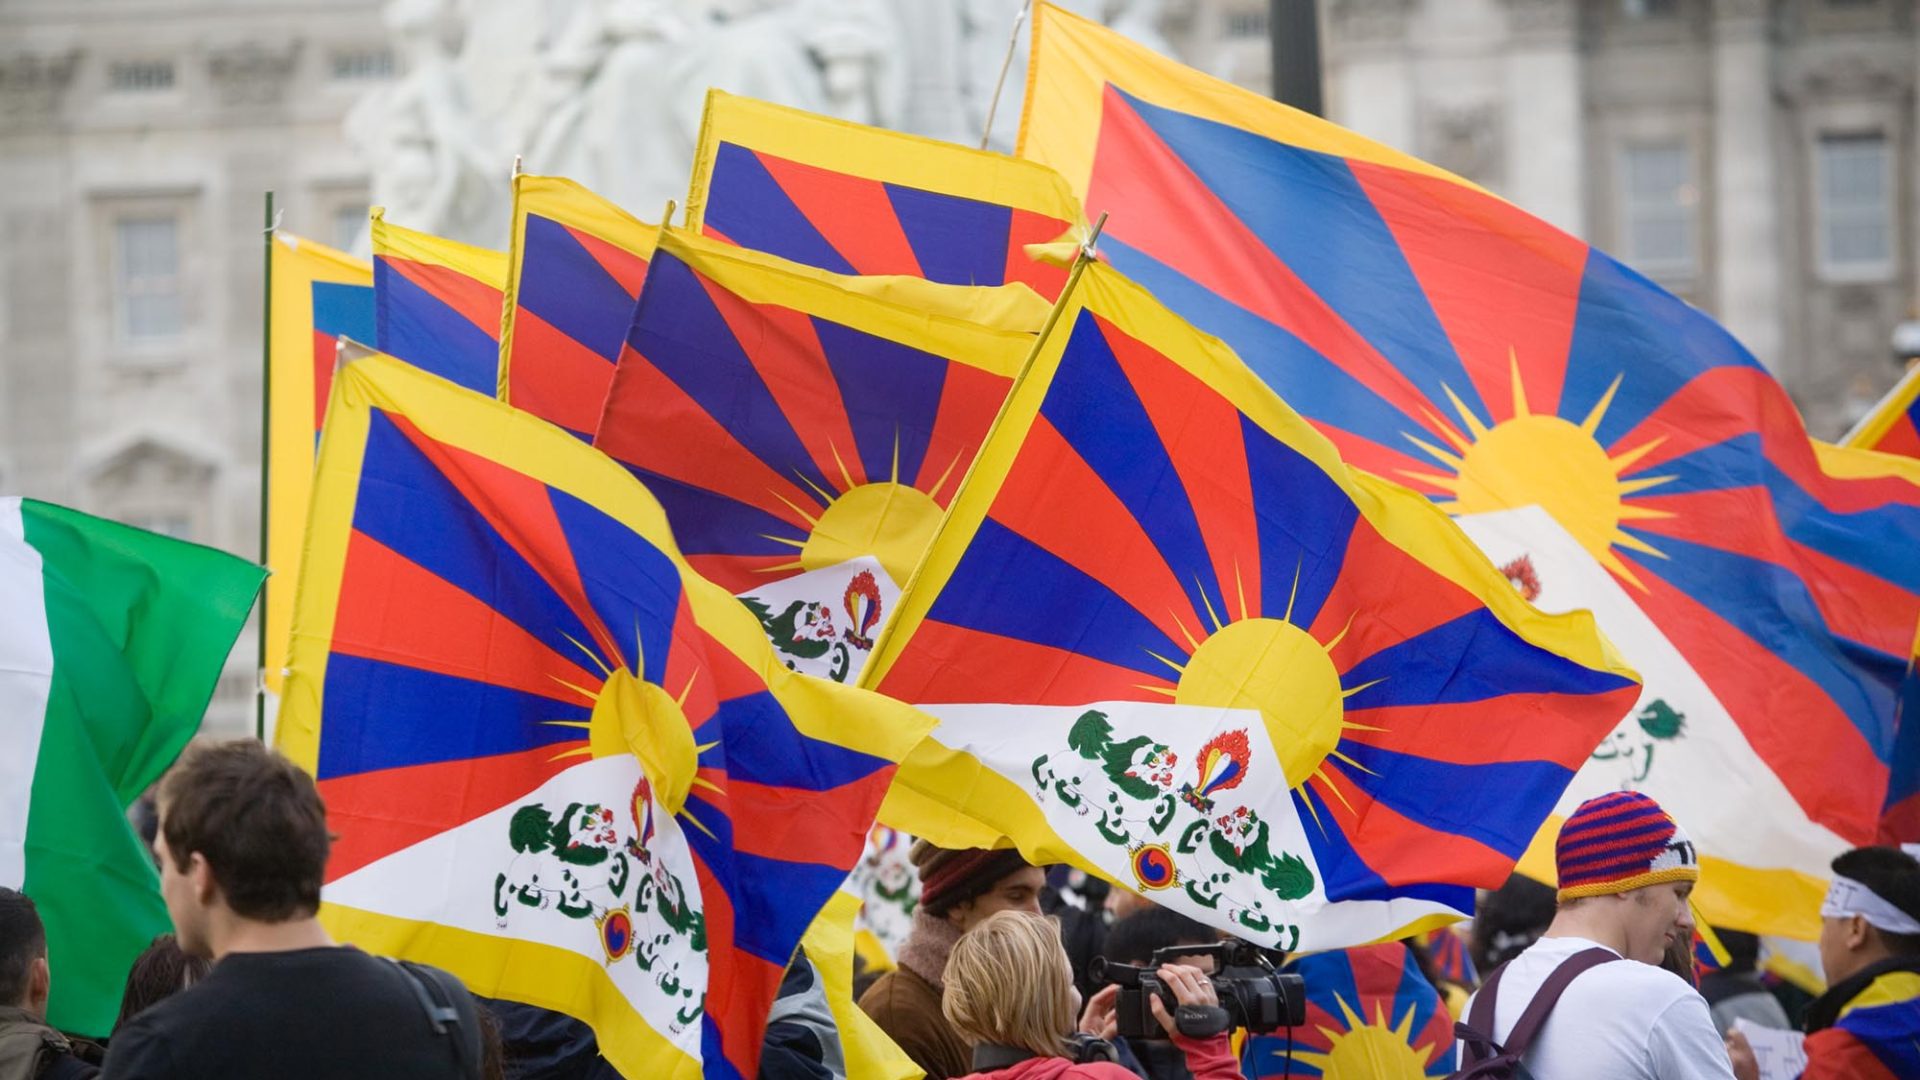 About us - Free Tibet